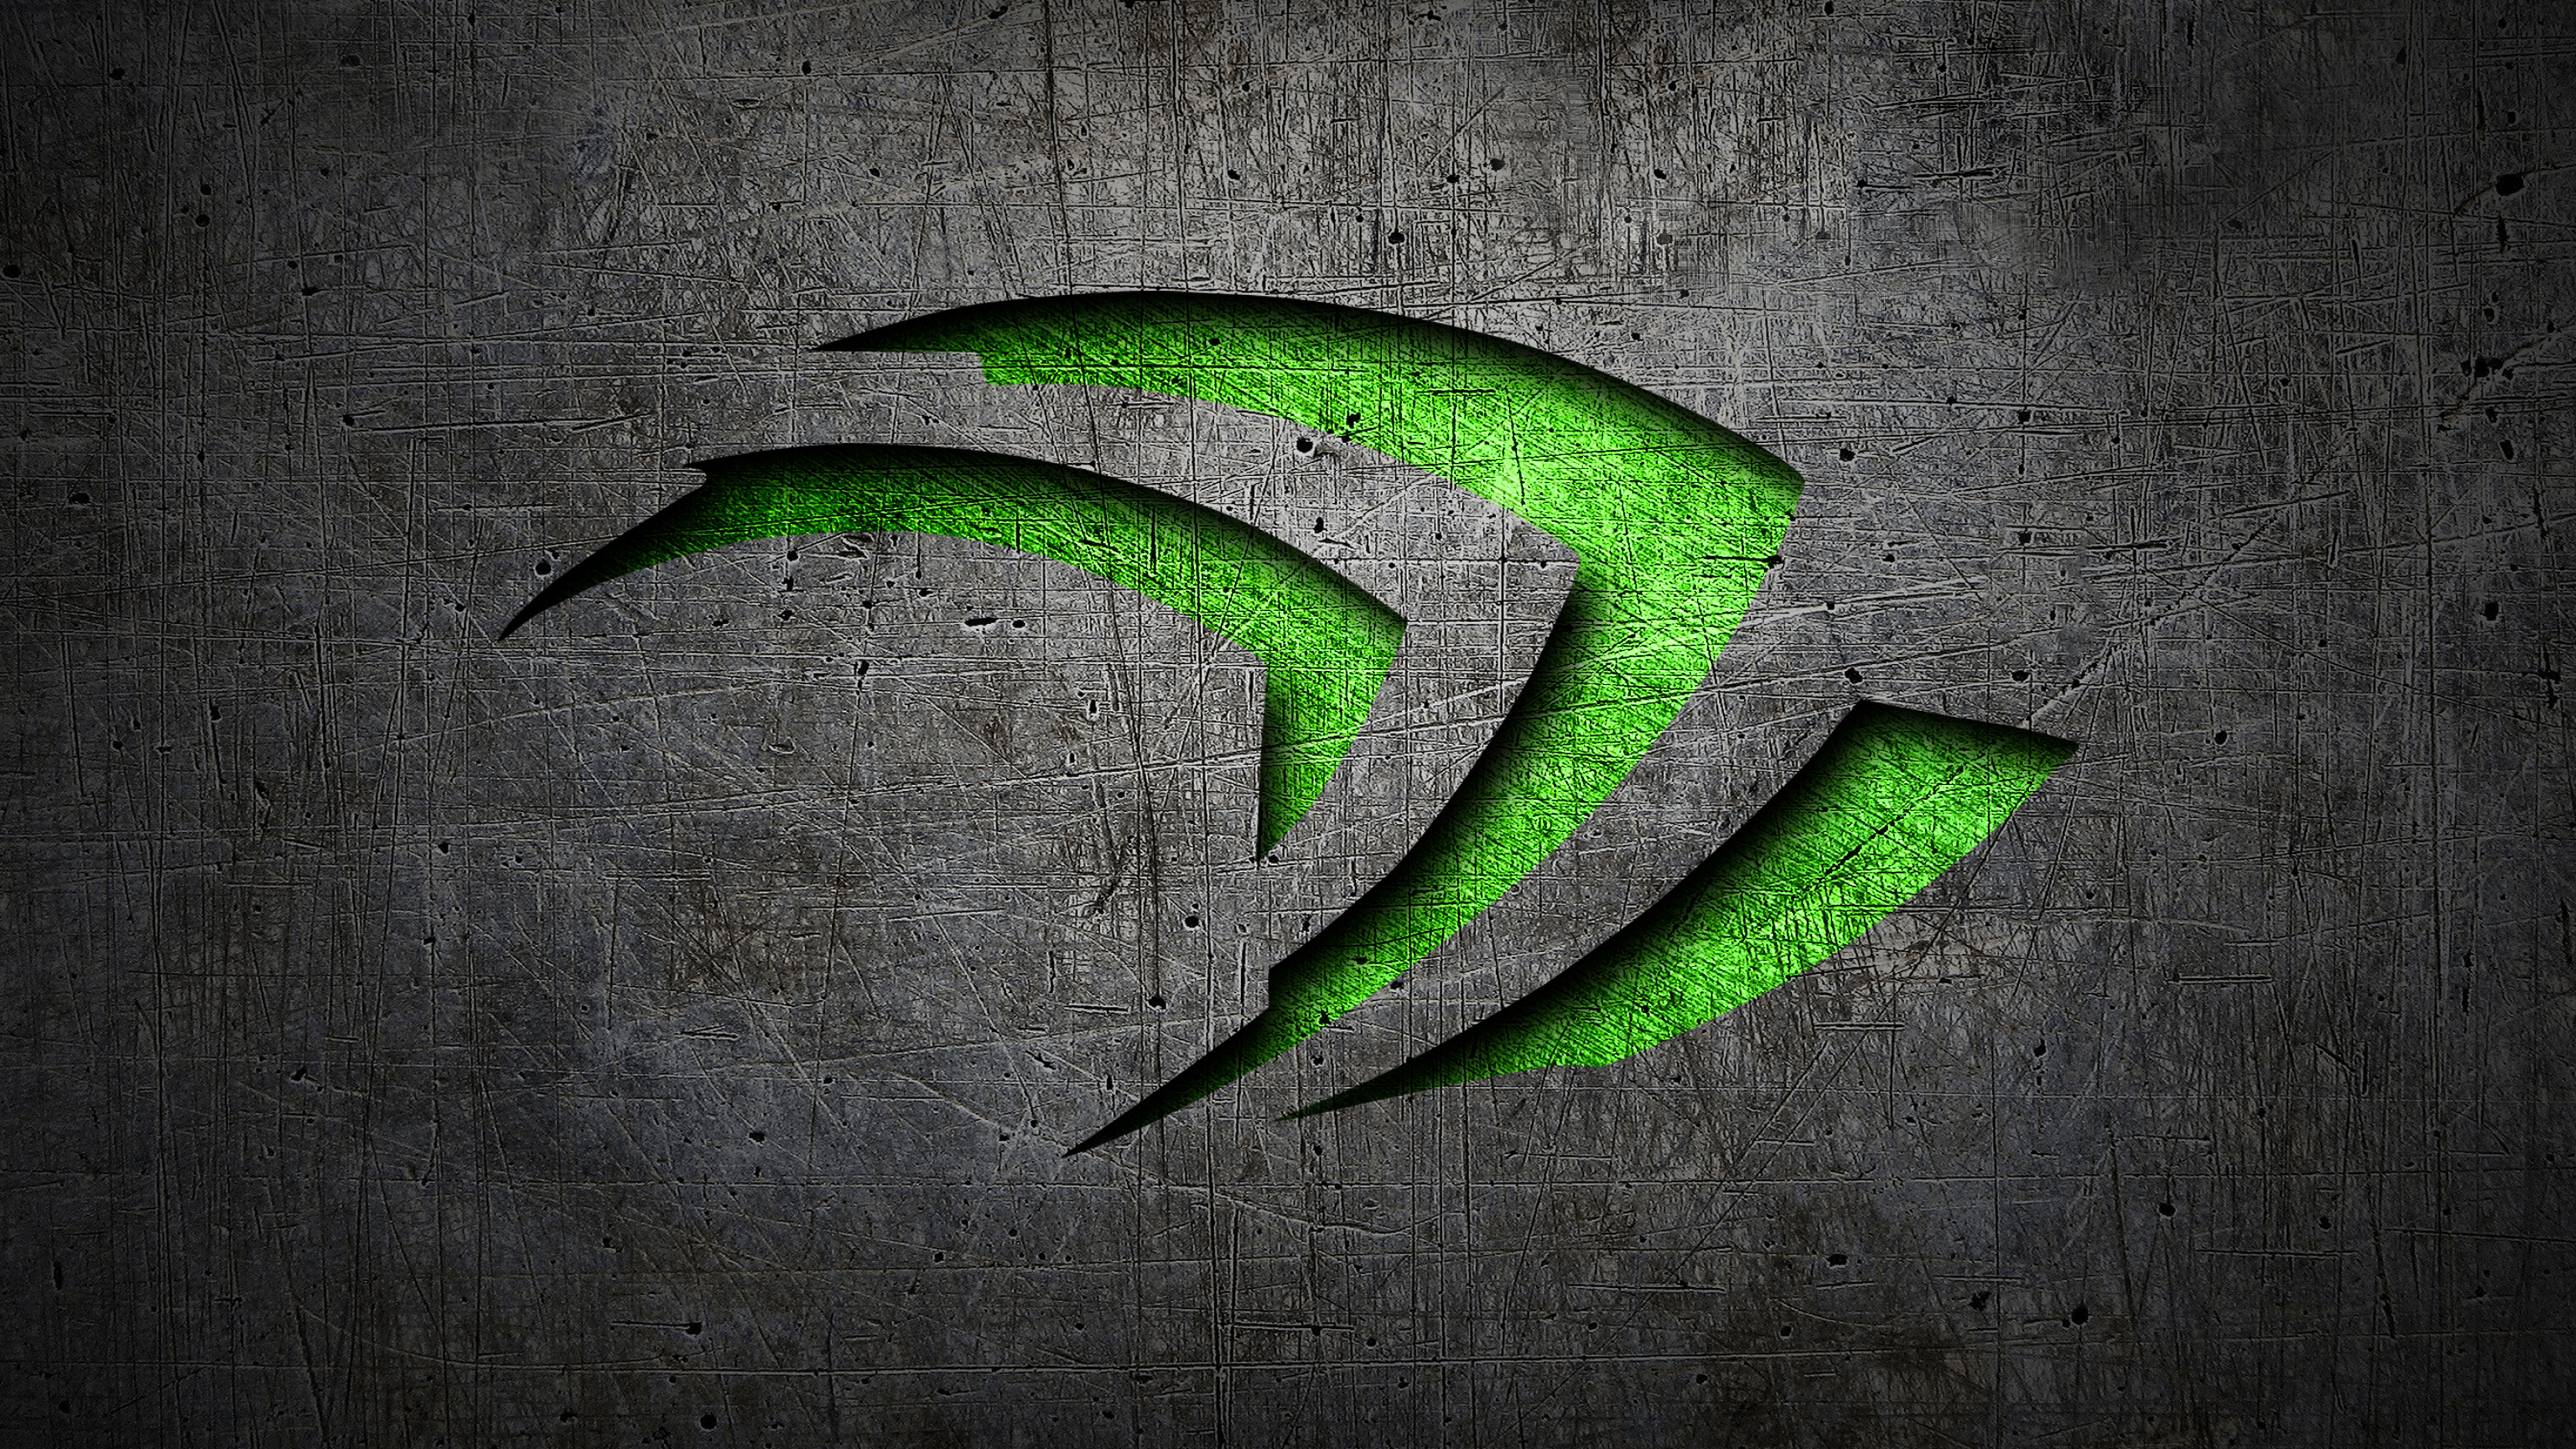 Nvidia: An American multinational technology company incorporated in Delaware and based in Santa Clara, California. 3840x2160 4K Wallpaper.